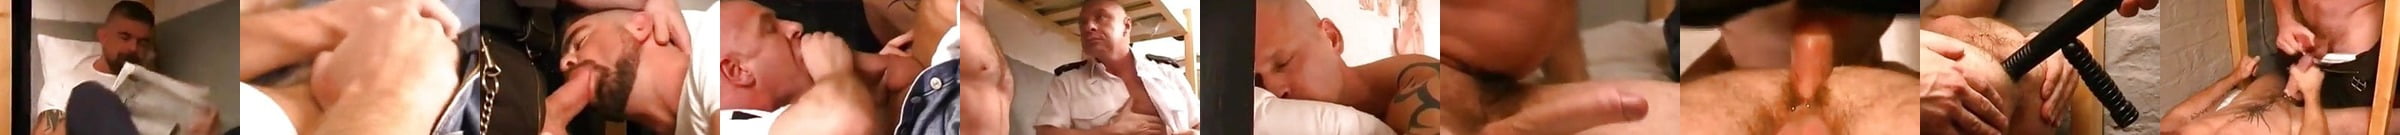 Sucking And Eating Cum Of Hairy Moustache Daddy Gay Xhamster